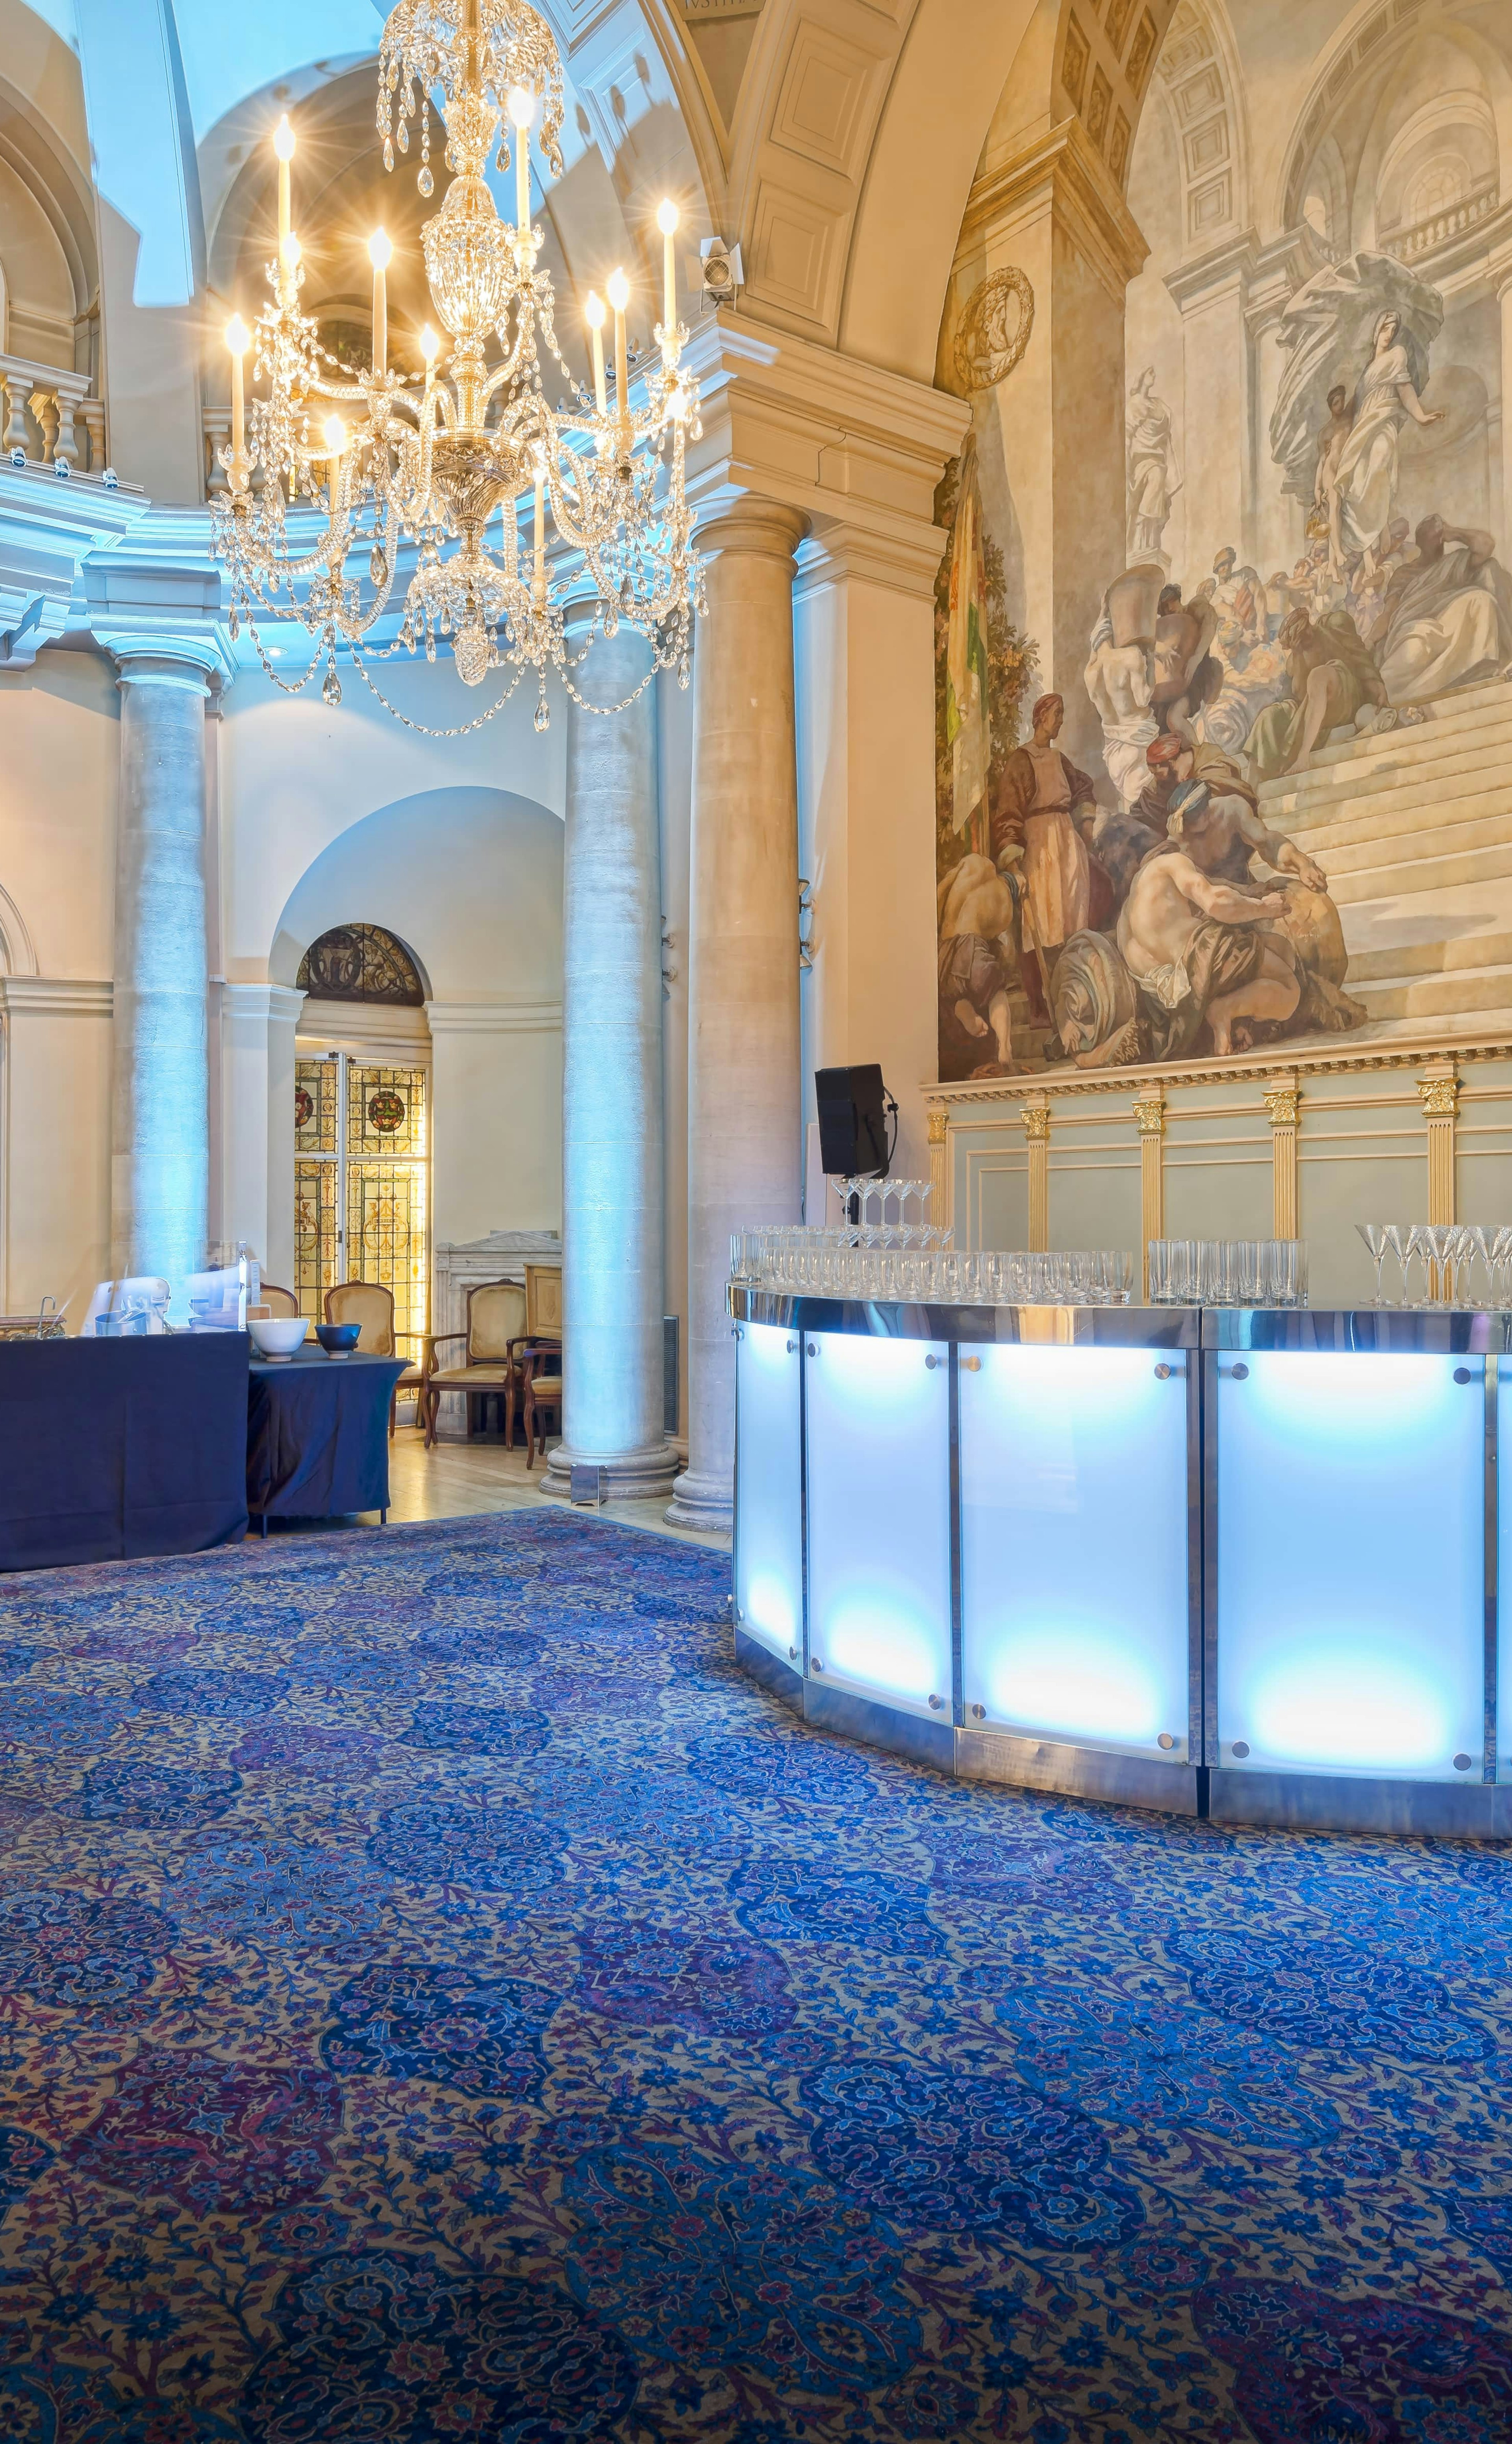 Conference Venues - One Moorgate Place